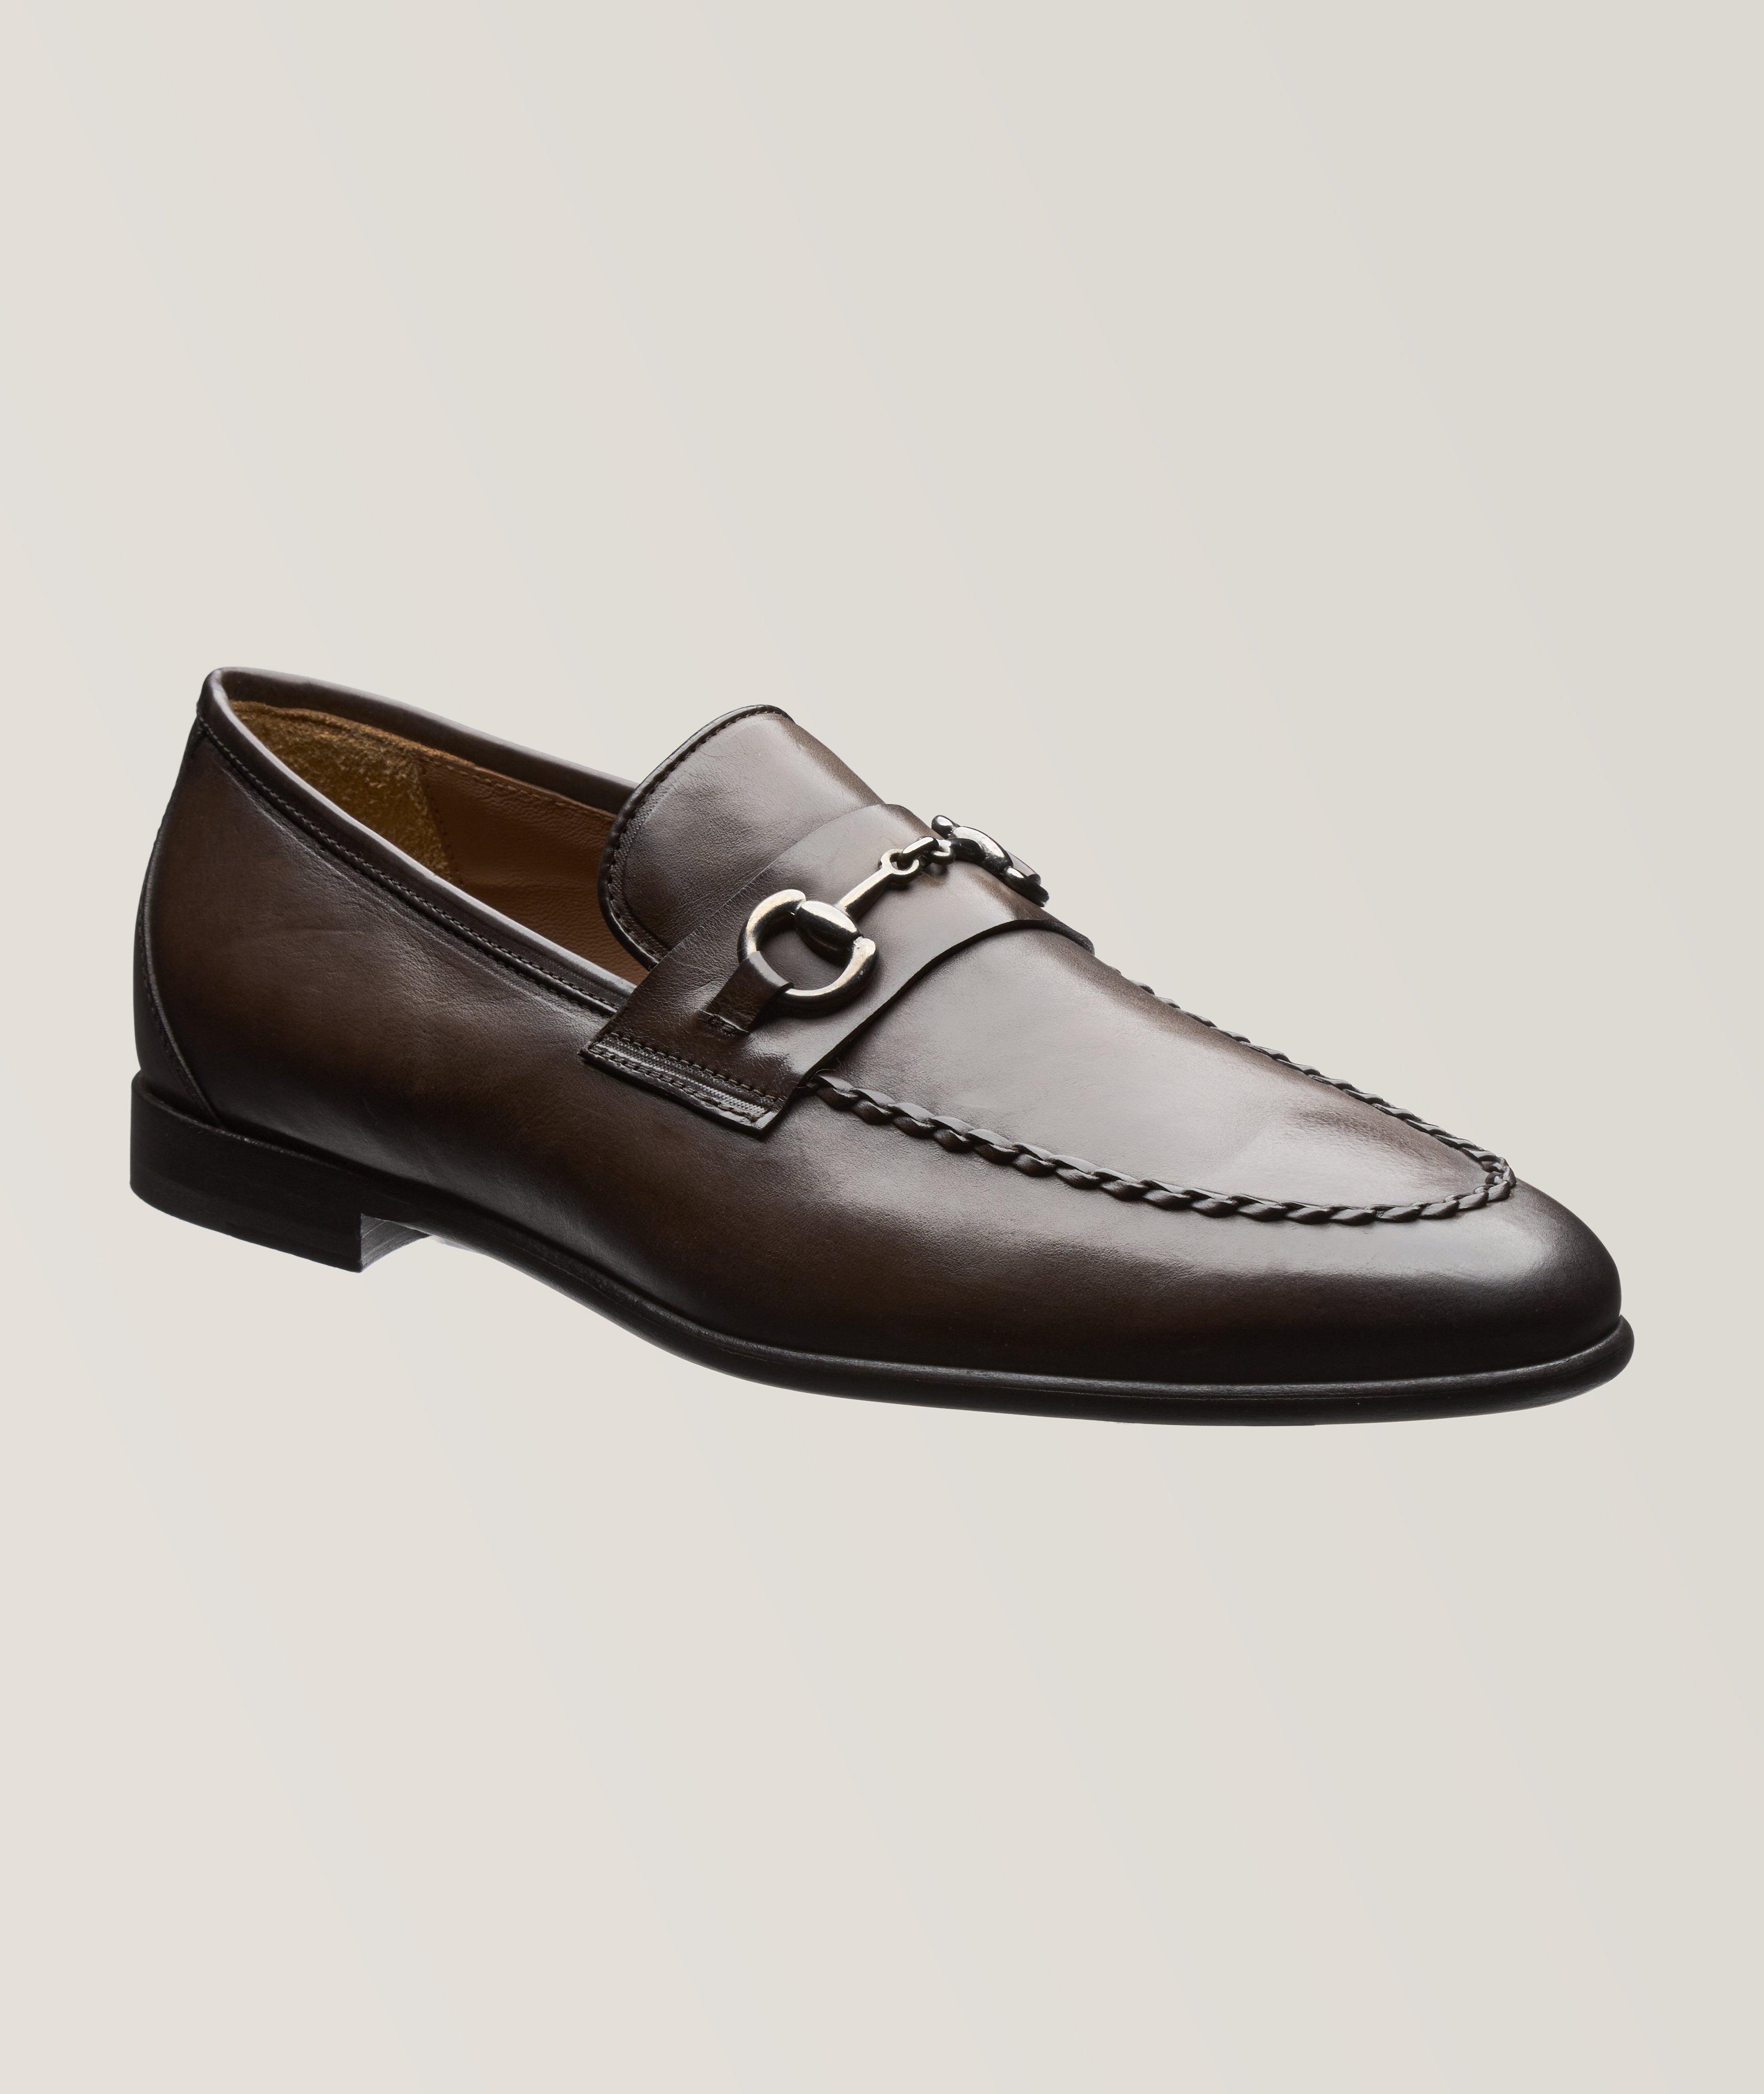 Leather Dress Shoes image 0